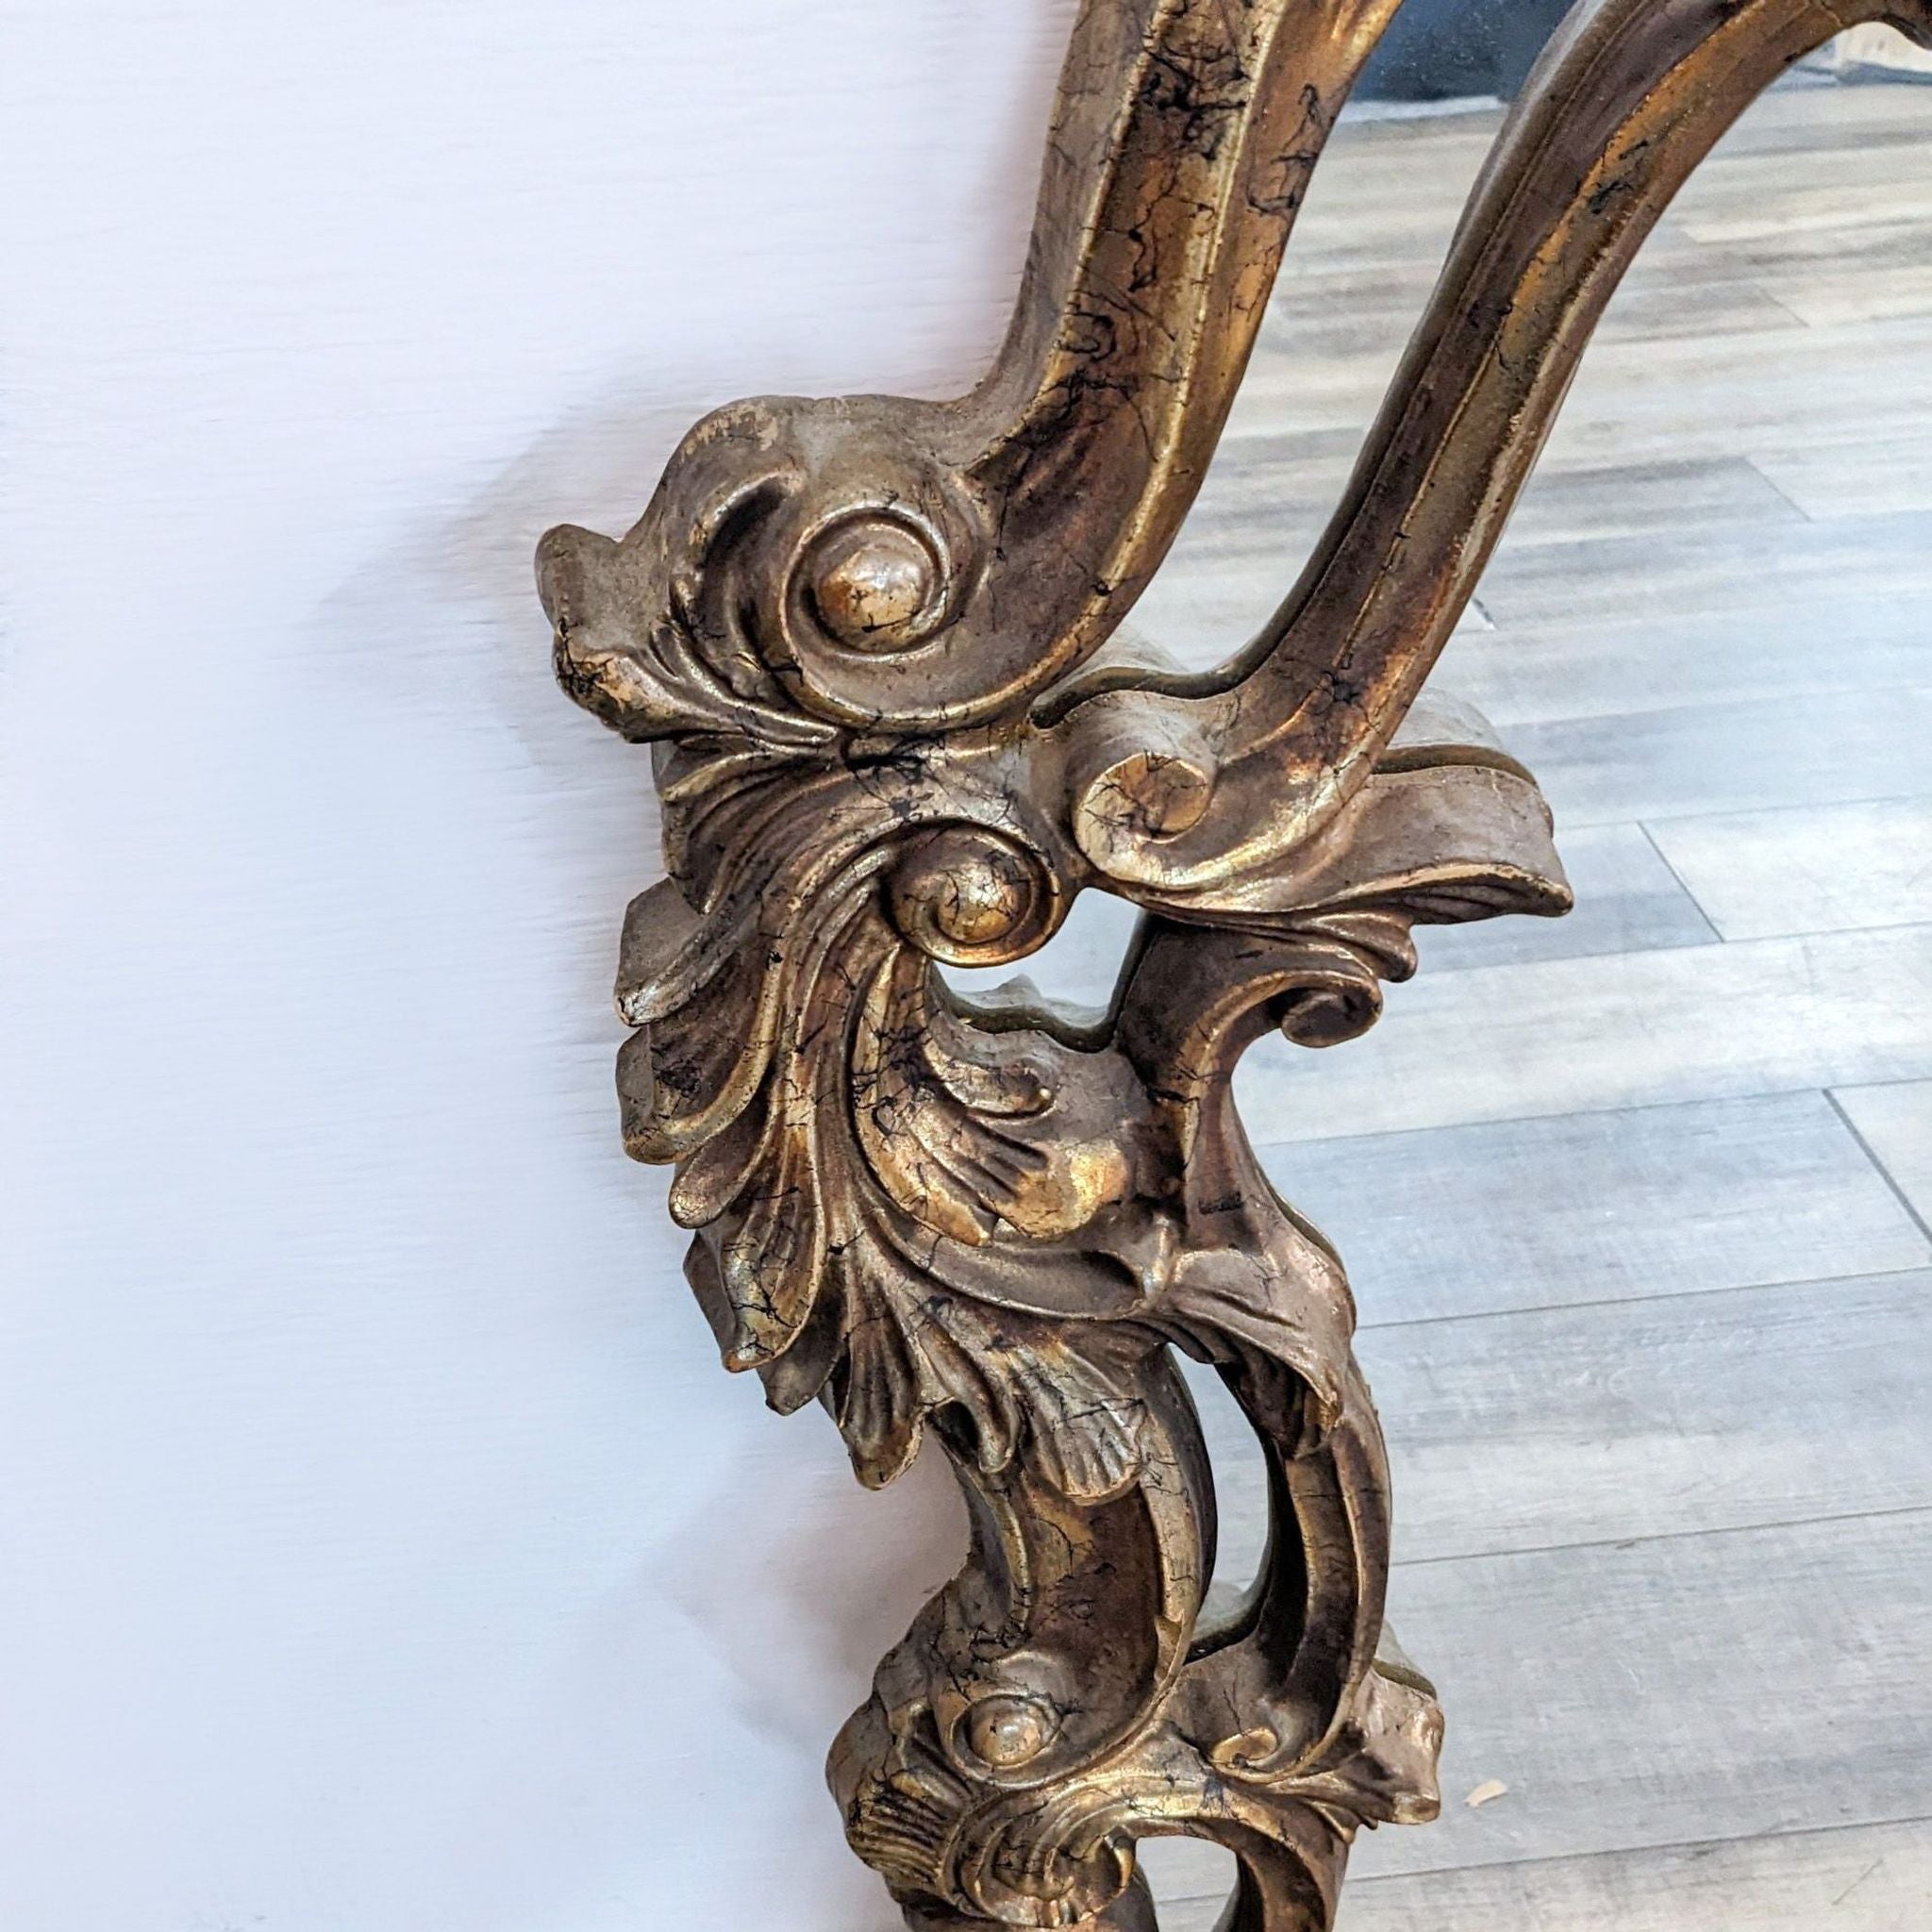 Close-up of a Reperch brand ornate mirror frame with gold accents and floral motifs.